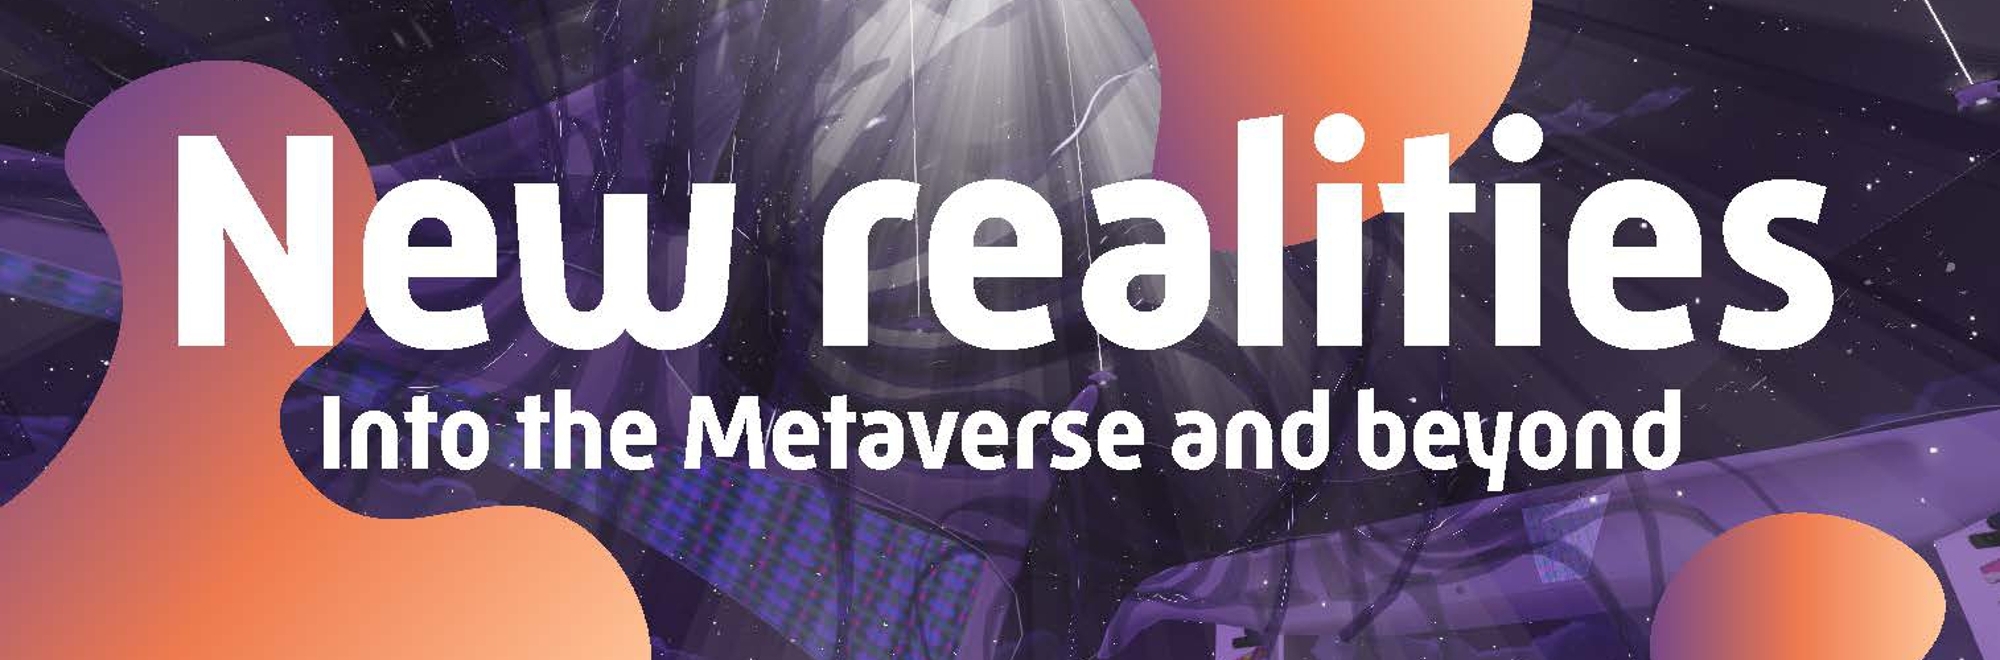 Wunderman Thompson launches new analysis ‘New Realities: Into the metaverse and beyond’